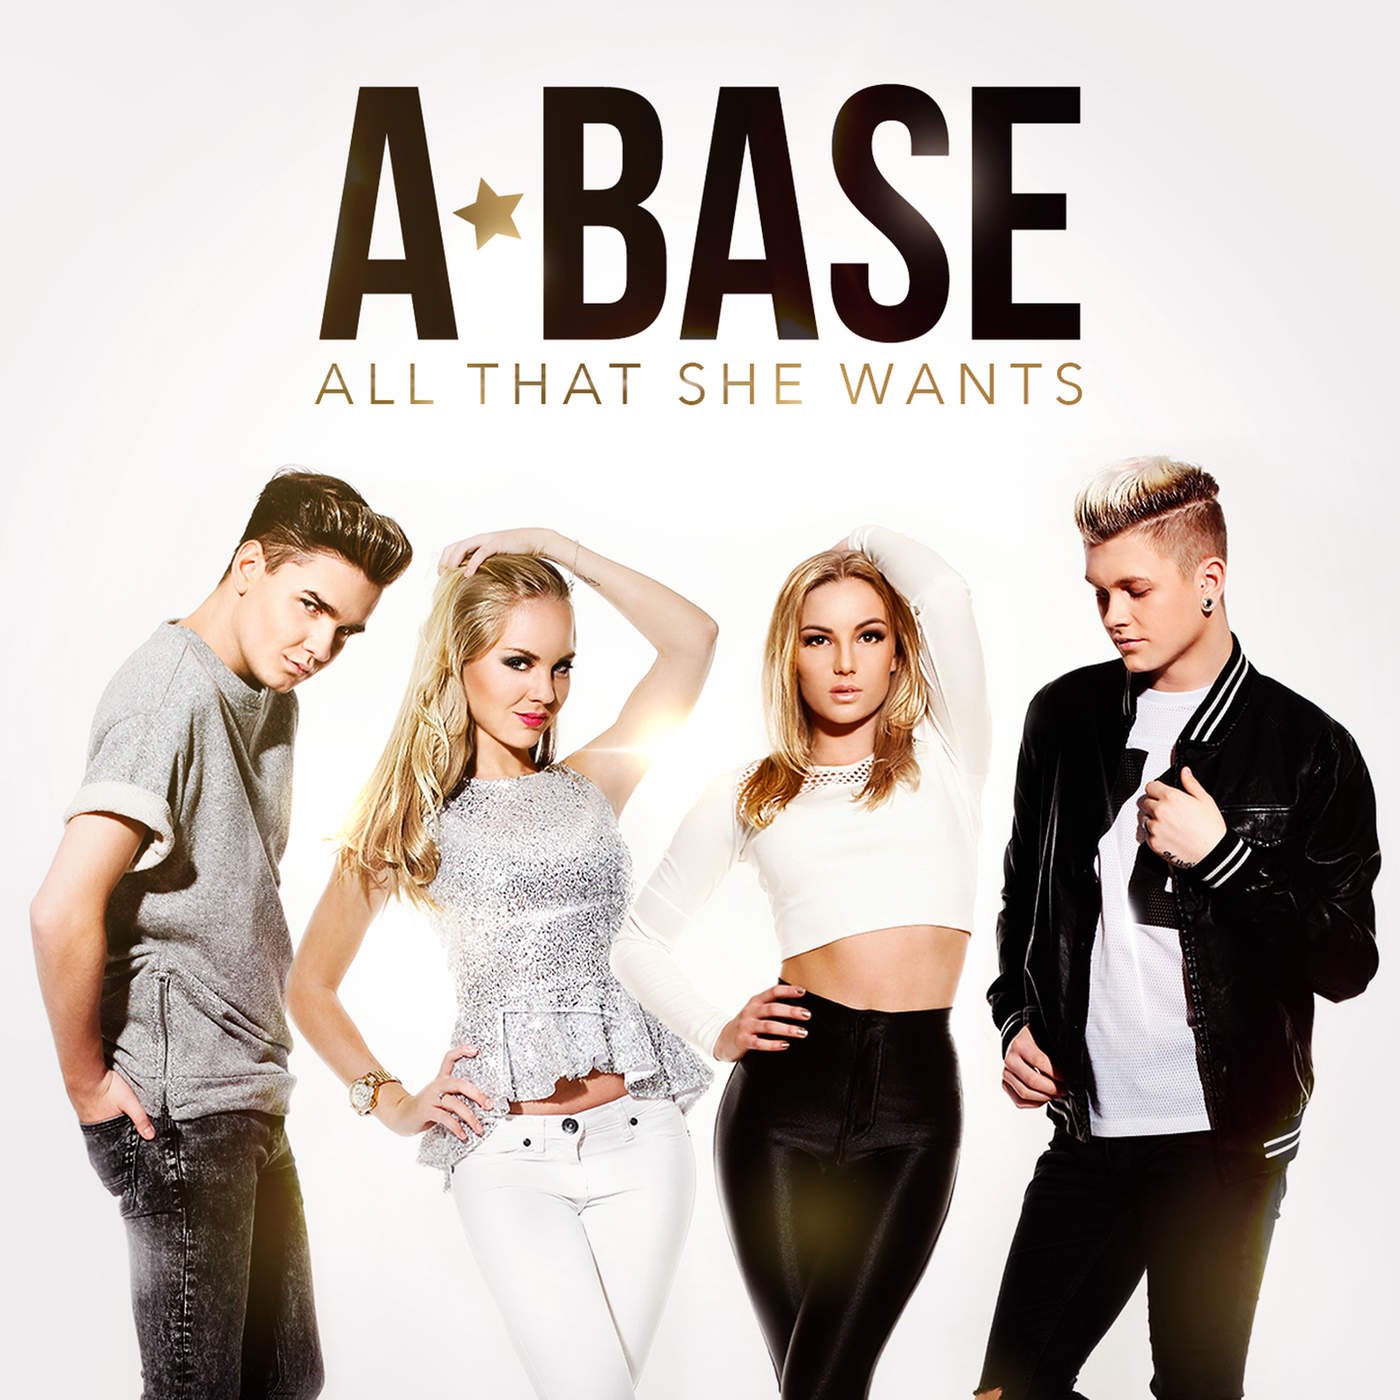 She want to go home. Ace of Base all that she wants альбом. Ace of Base all that she wants обложка. Ace of Base Ace of Base - all that she wants. Ice of Base песня all that she wants.